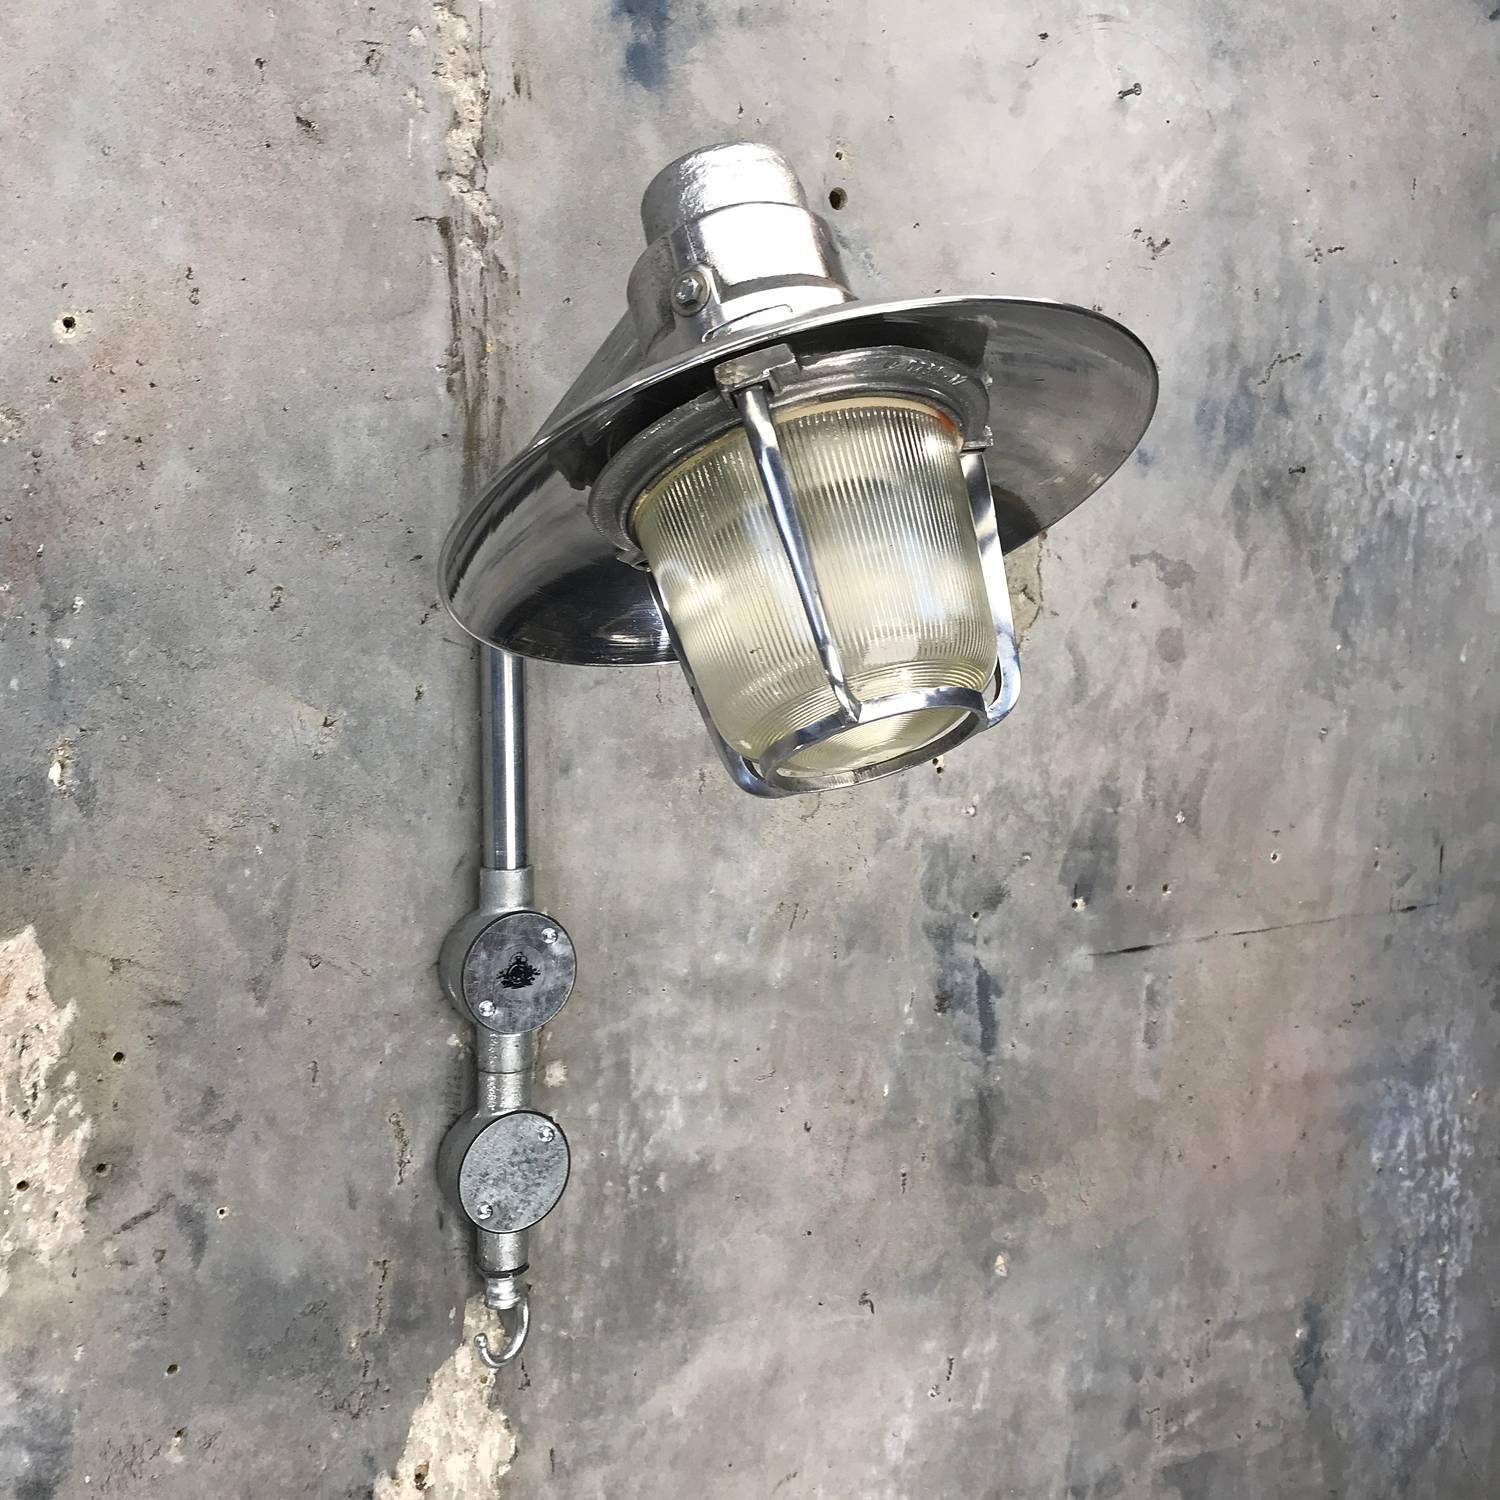 Retro aluminum wall light with prismatic glass shade.  Reclaimed from cargo ships and professionally restored in the UK ready for modern interiors.  

The glass is clamped down by the cast frame.  The frame and the glass turn and detach to reveal